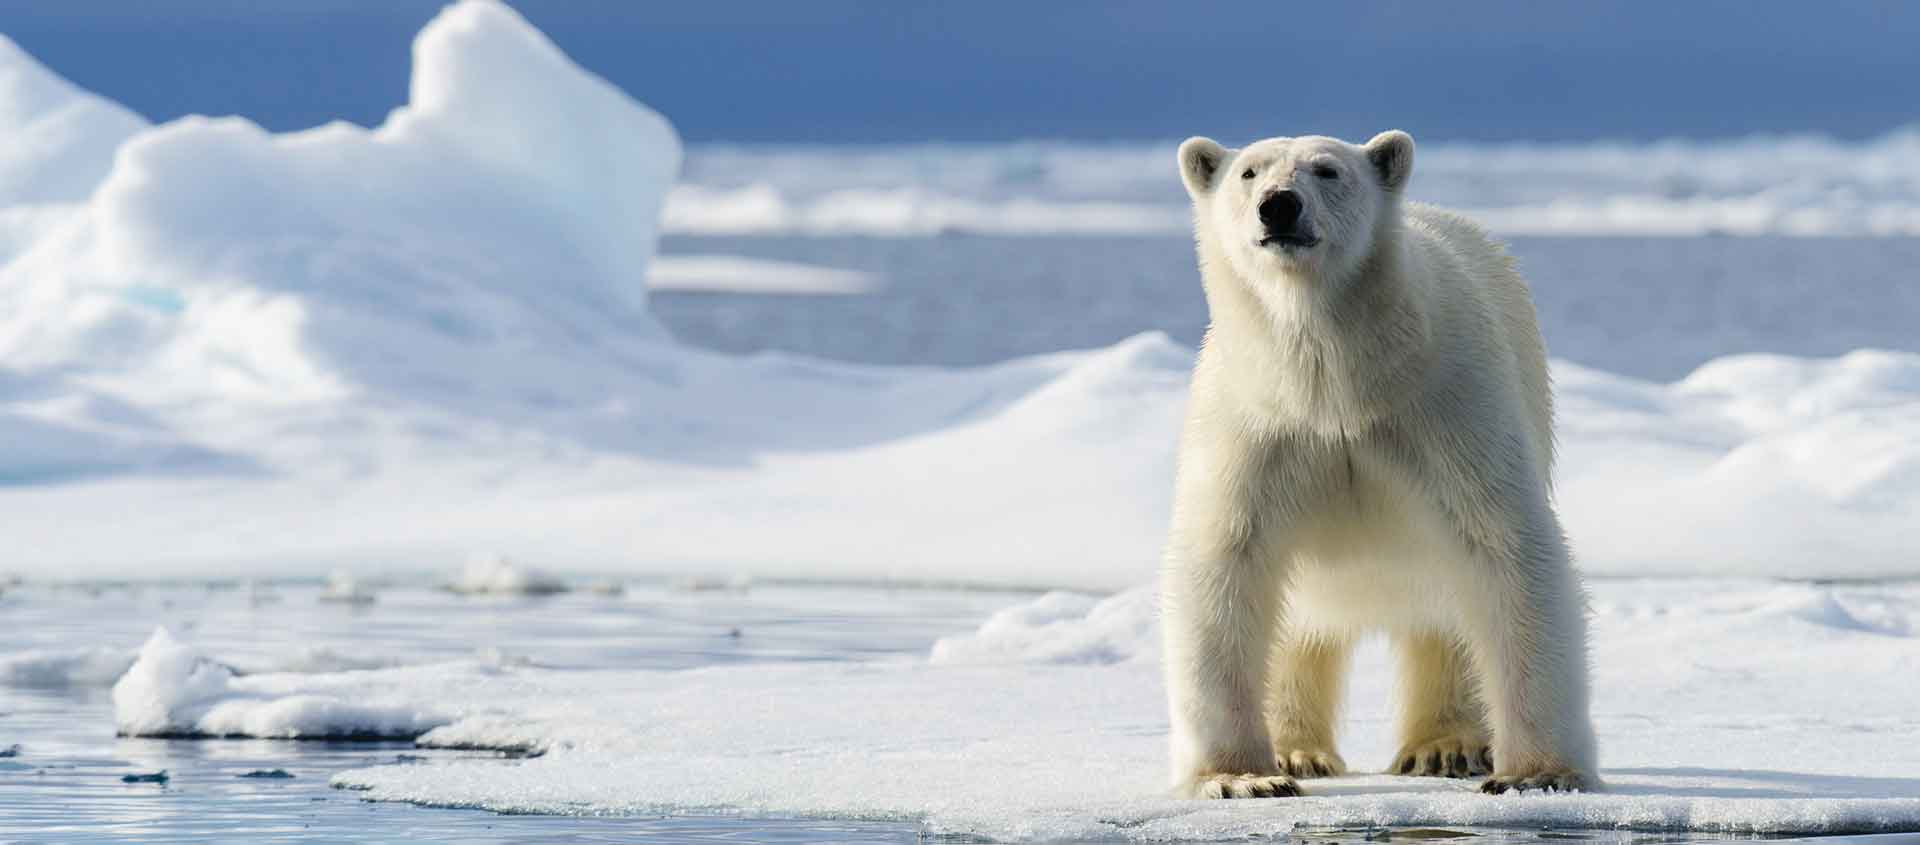 Northwest Passage expedition picture of a Polar Bear